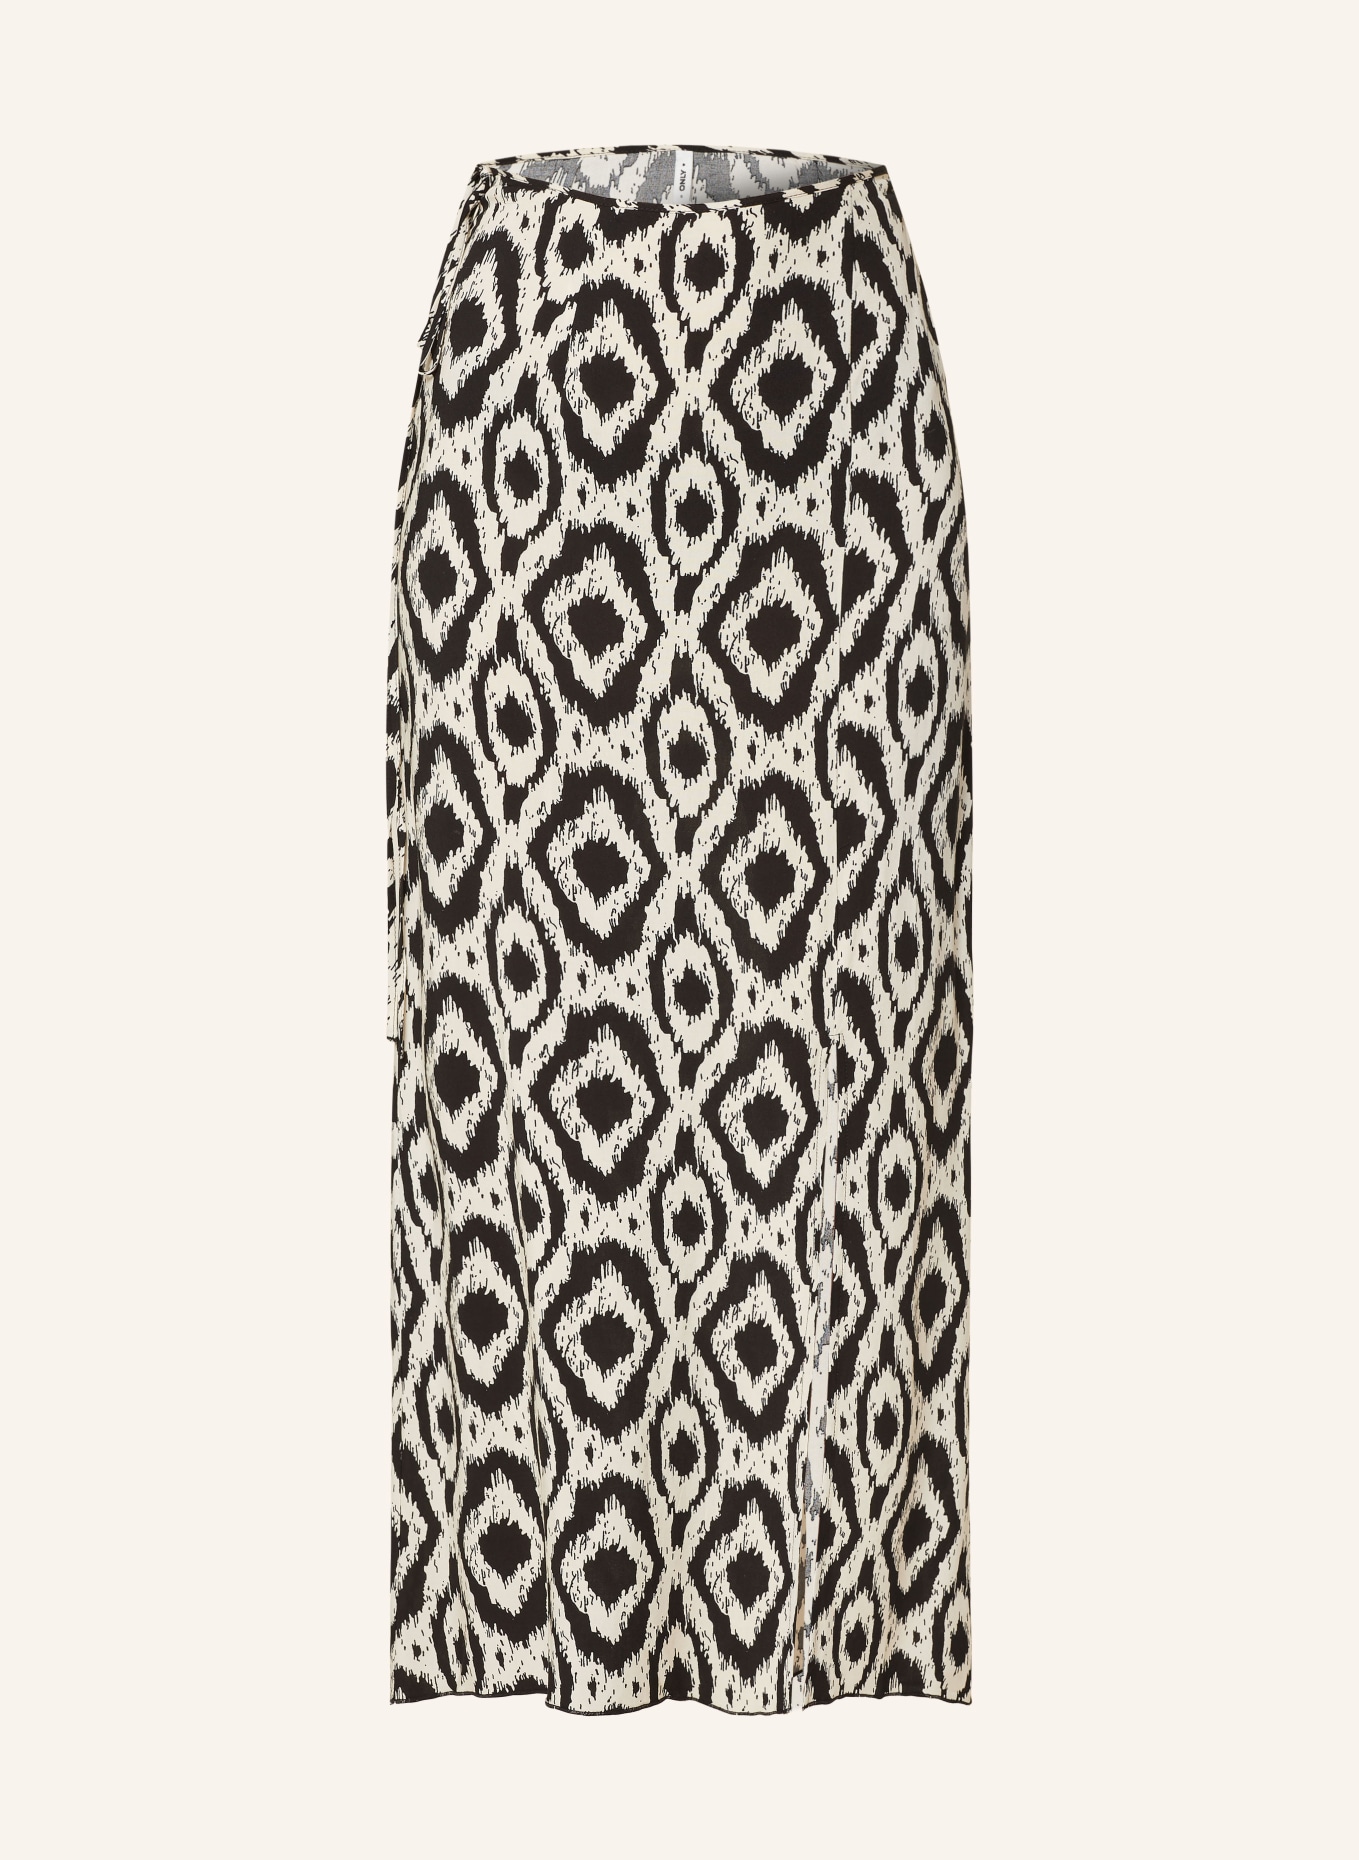 ONLY Skirt, Color: CREAM/ BLACK (Image 1)